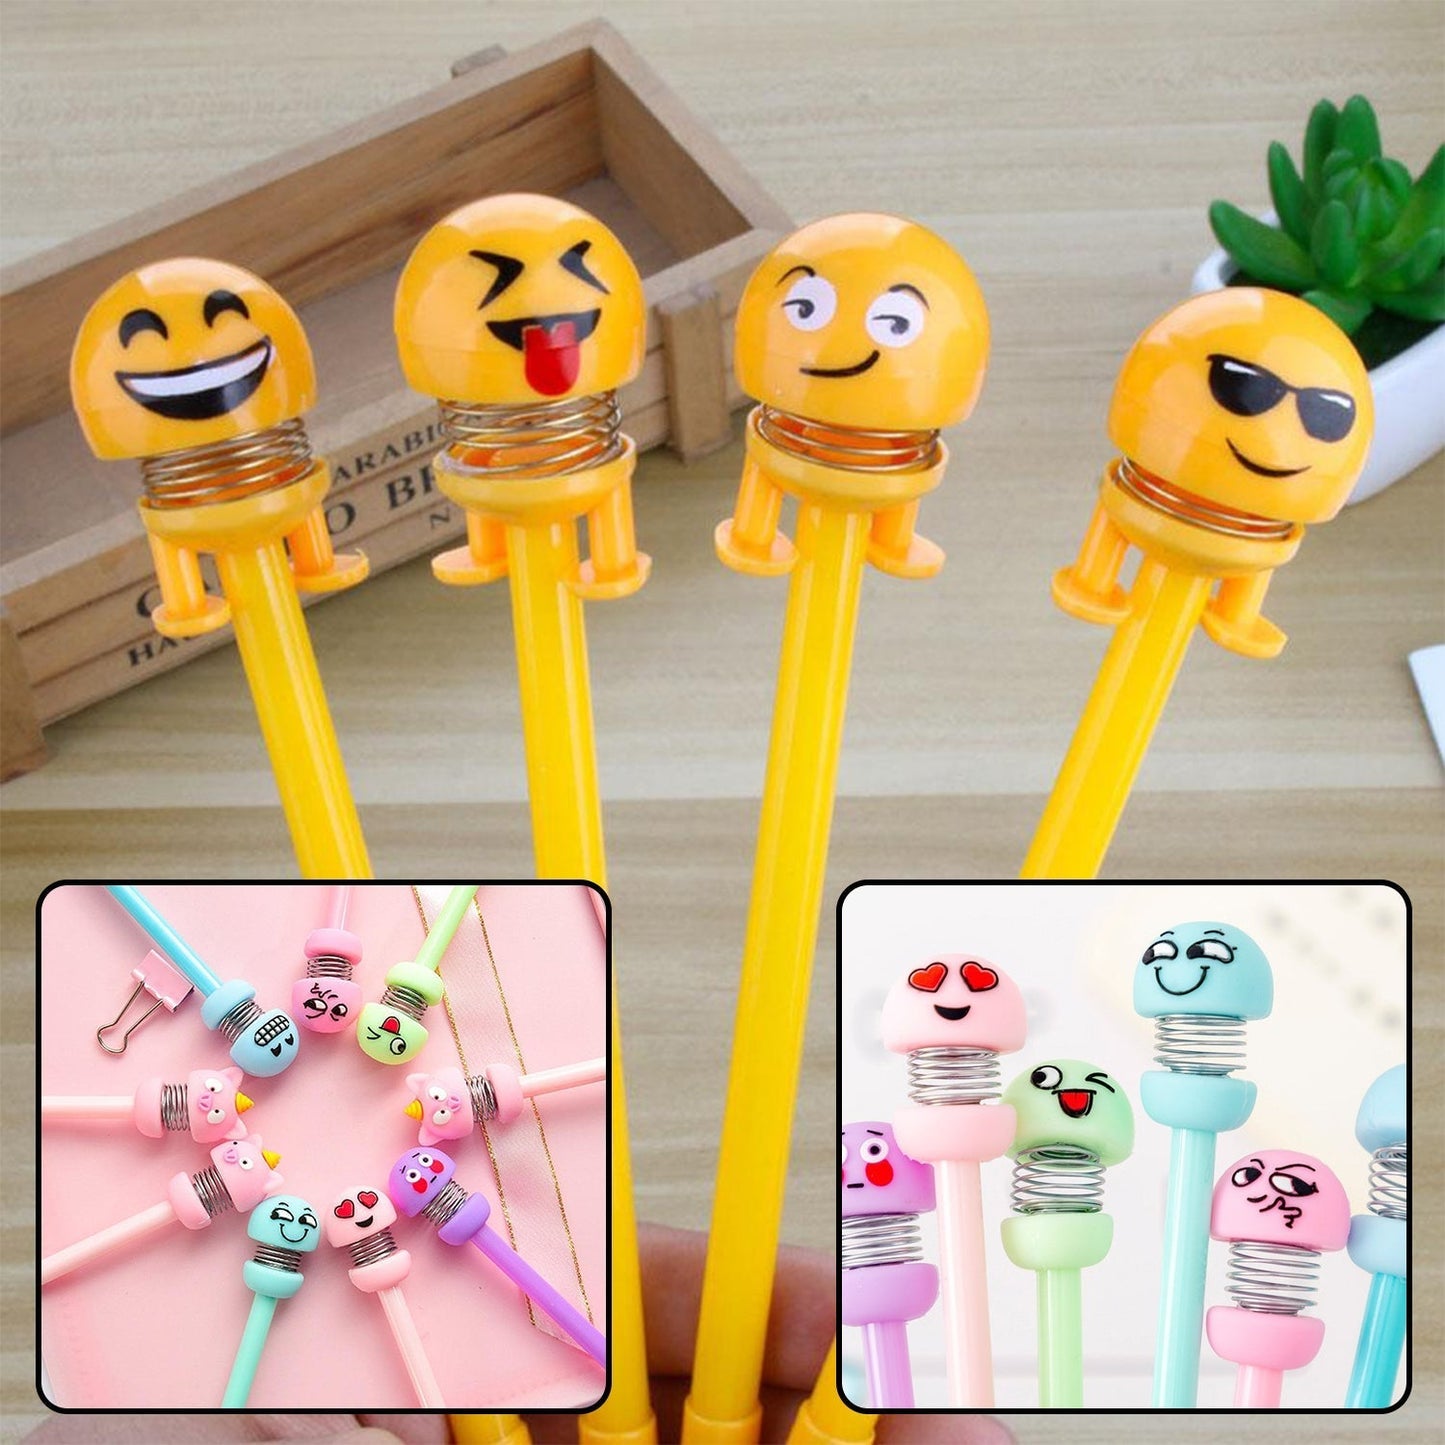 4771 Emoji Pen and Emoji Pencil Used by kids for writing and playing purposes etc. DeoDap